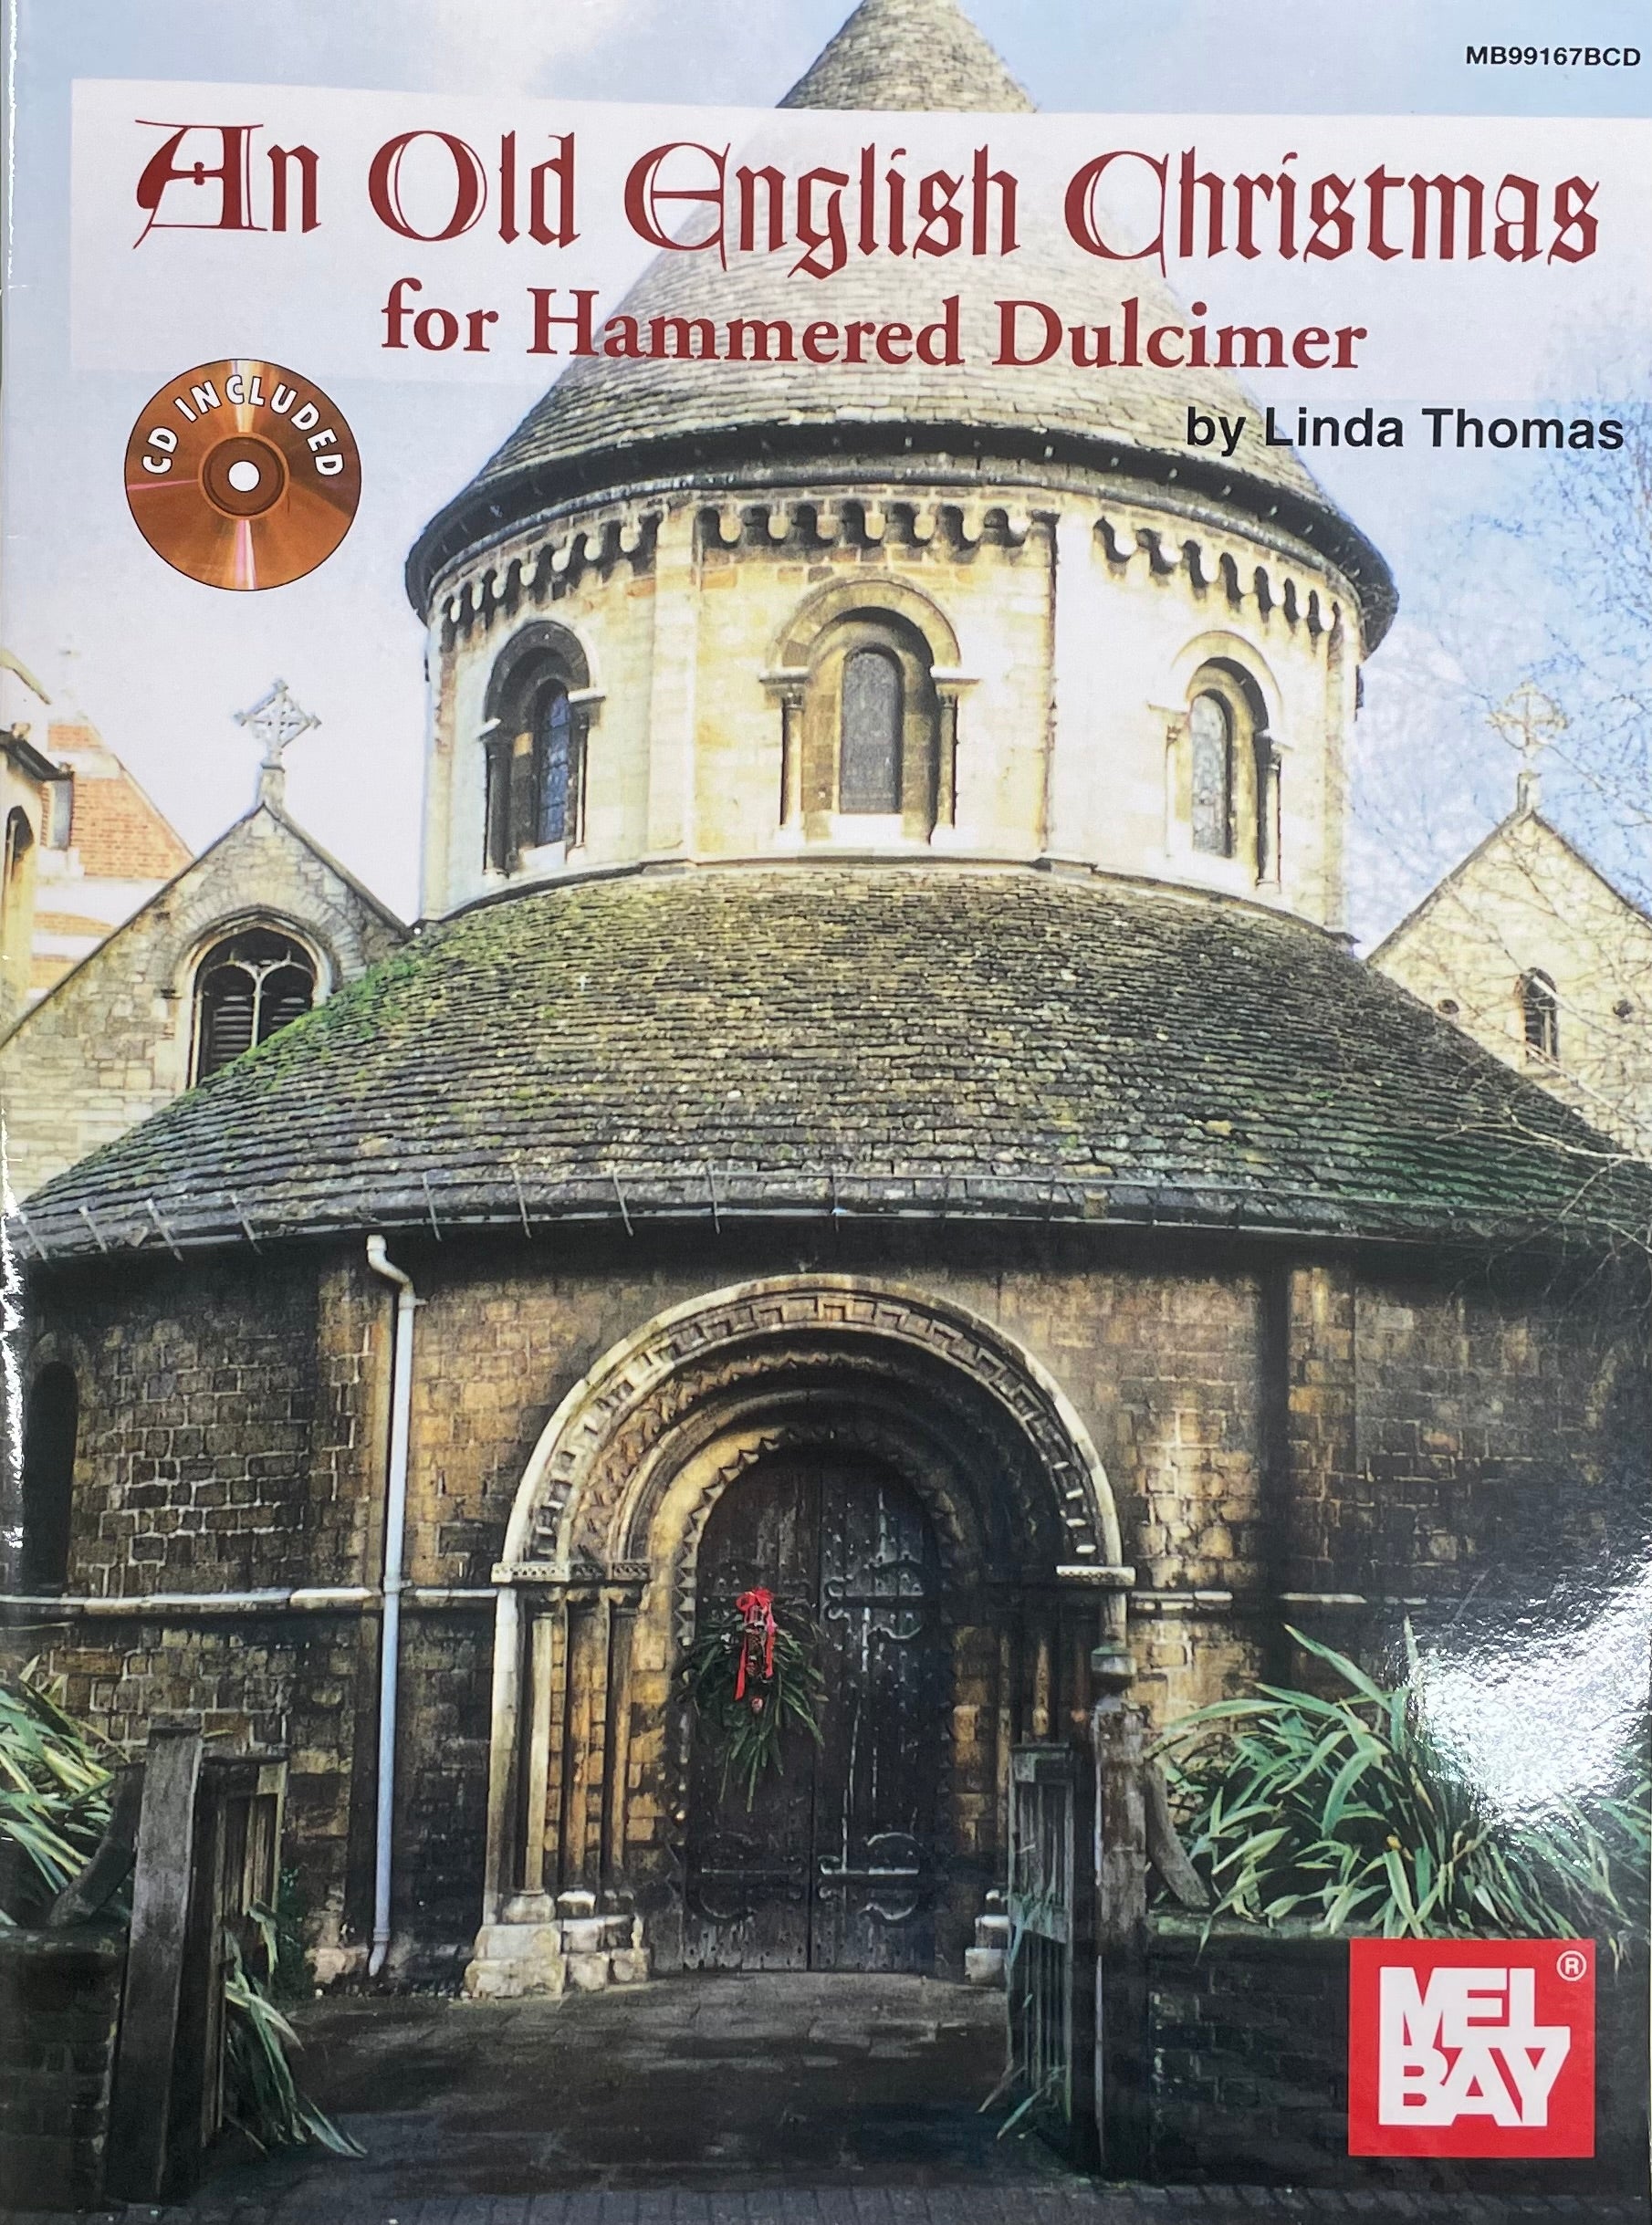 Cover of the book *An Old English Christmas for Hammered Dulcimer by Linda Thomas*, featuring a stone church with a domed roof adorned with a Christmas wreath. A CD is included, along with standard notation and tuning charts to guide your musical journey.